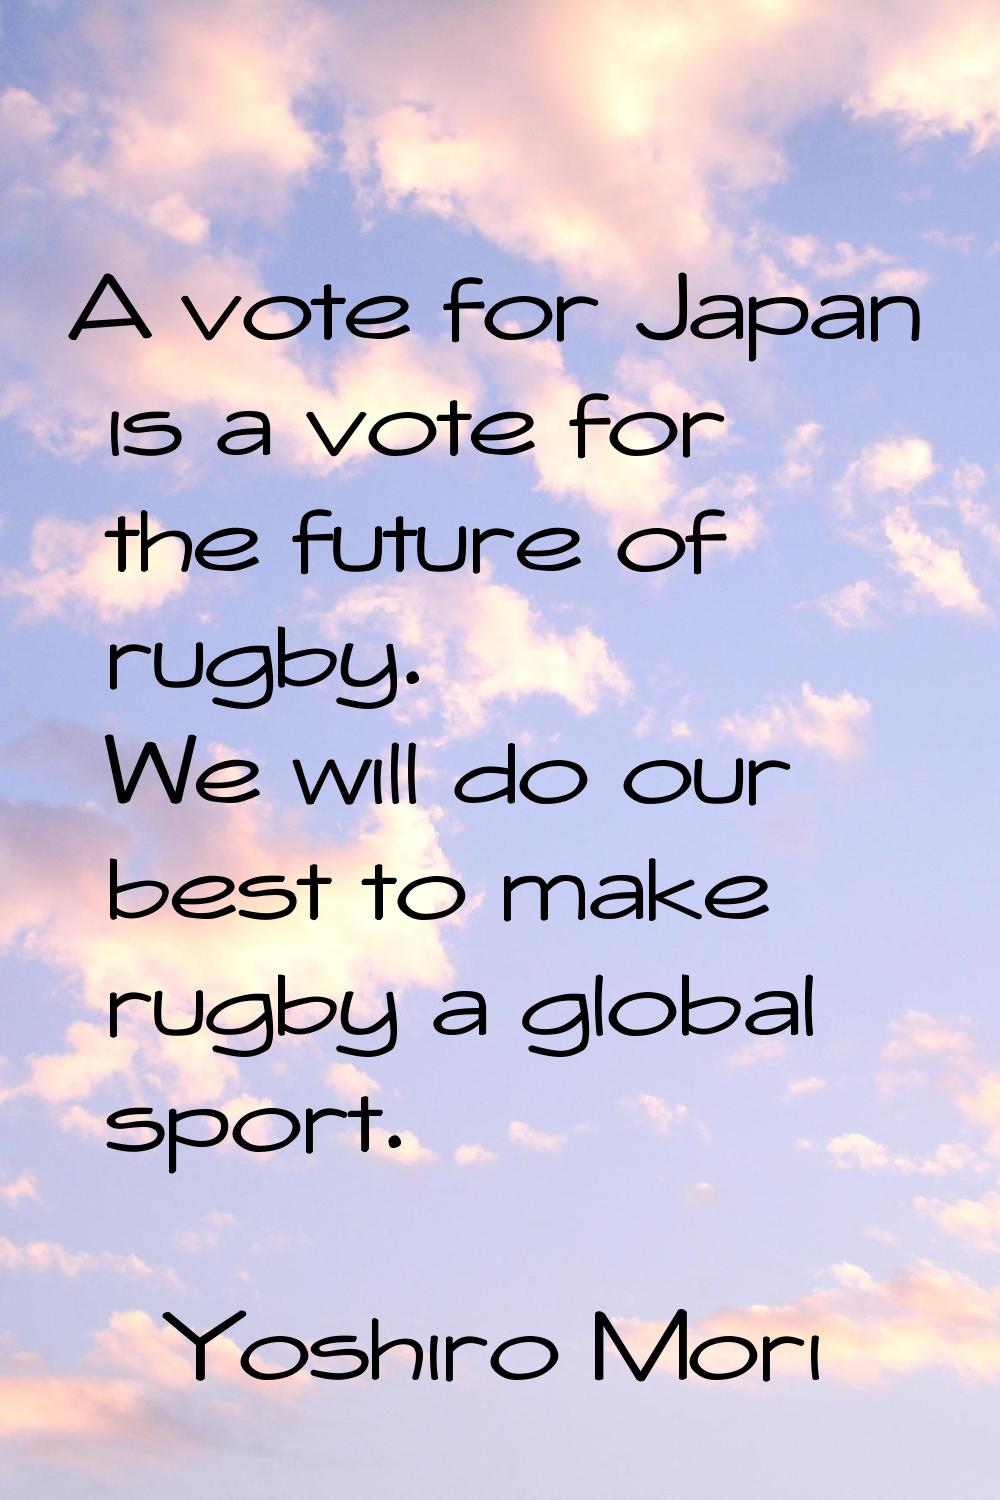 A vote for Japan is a vote for the future of rugby. We will do our best to make rugby a global spor